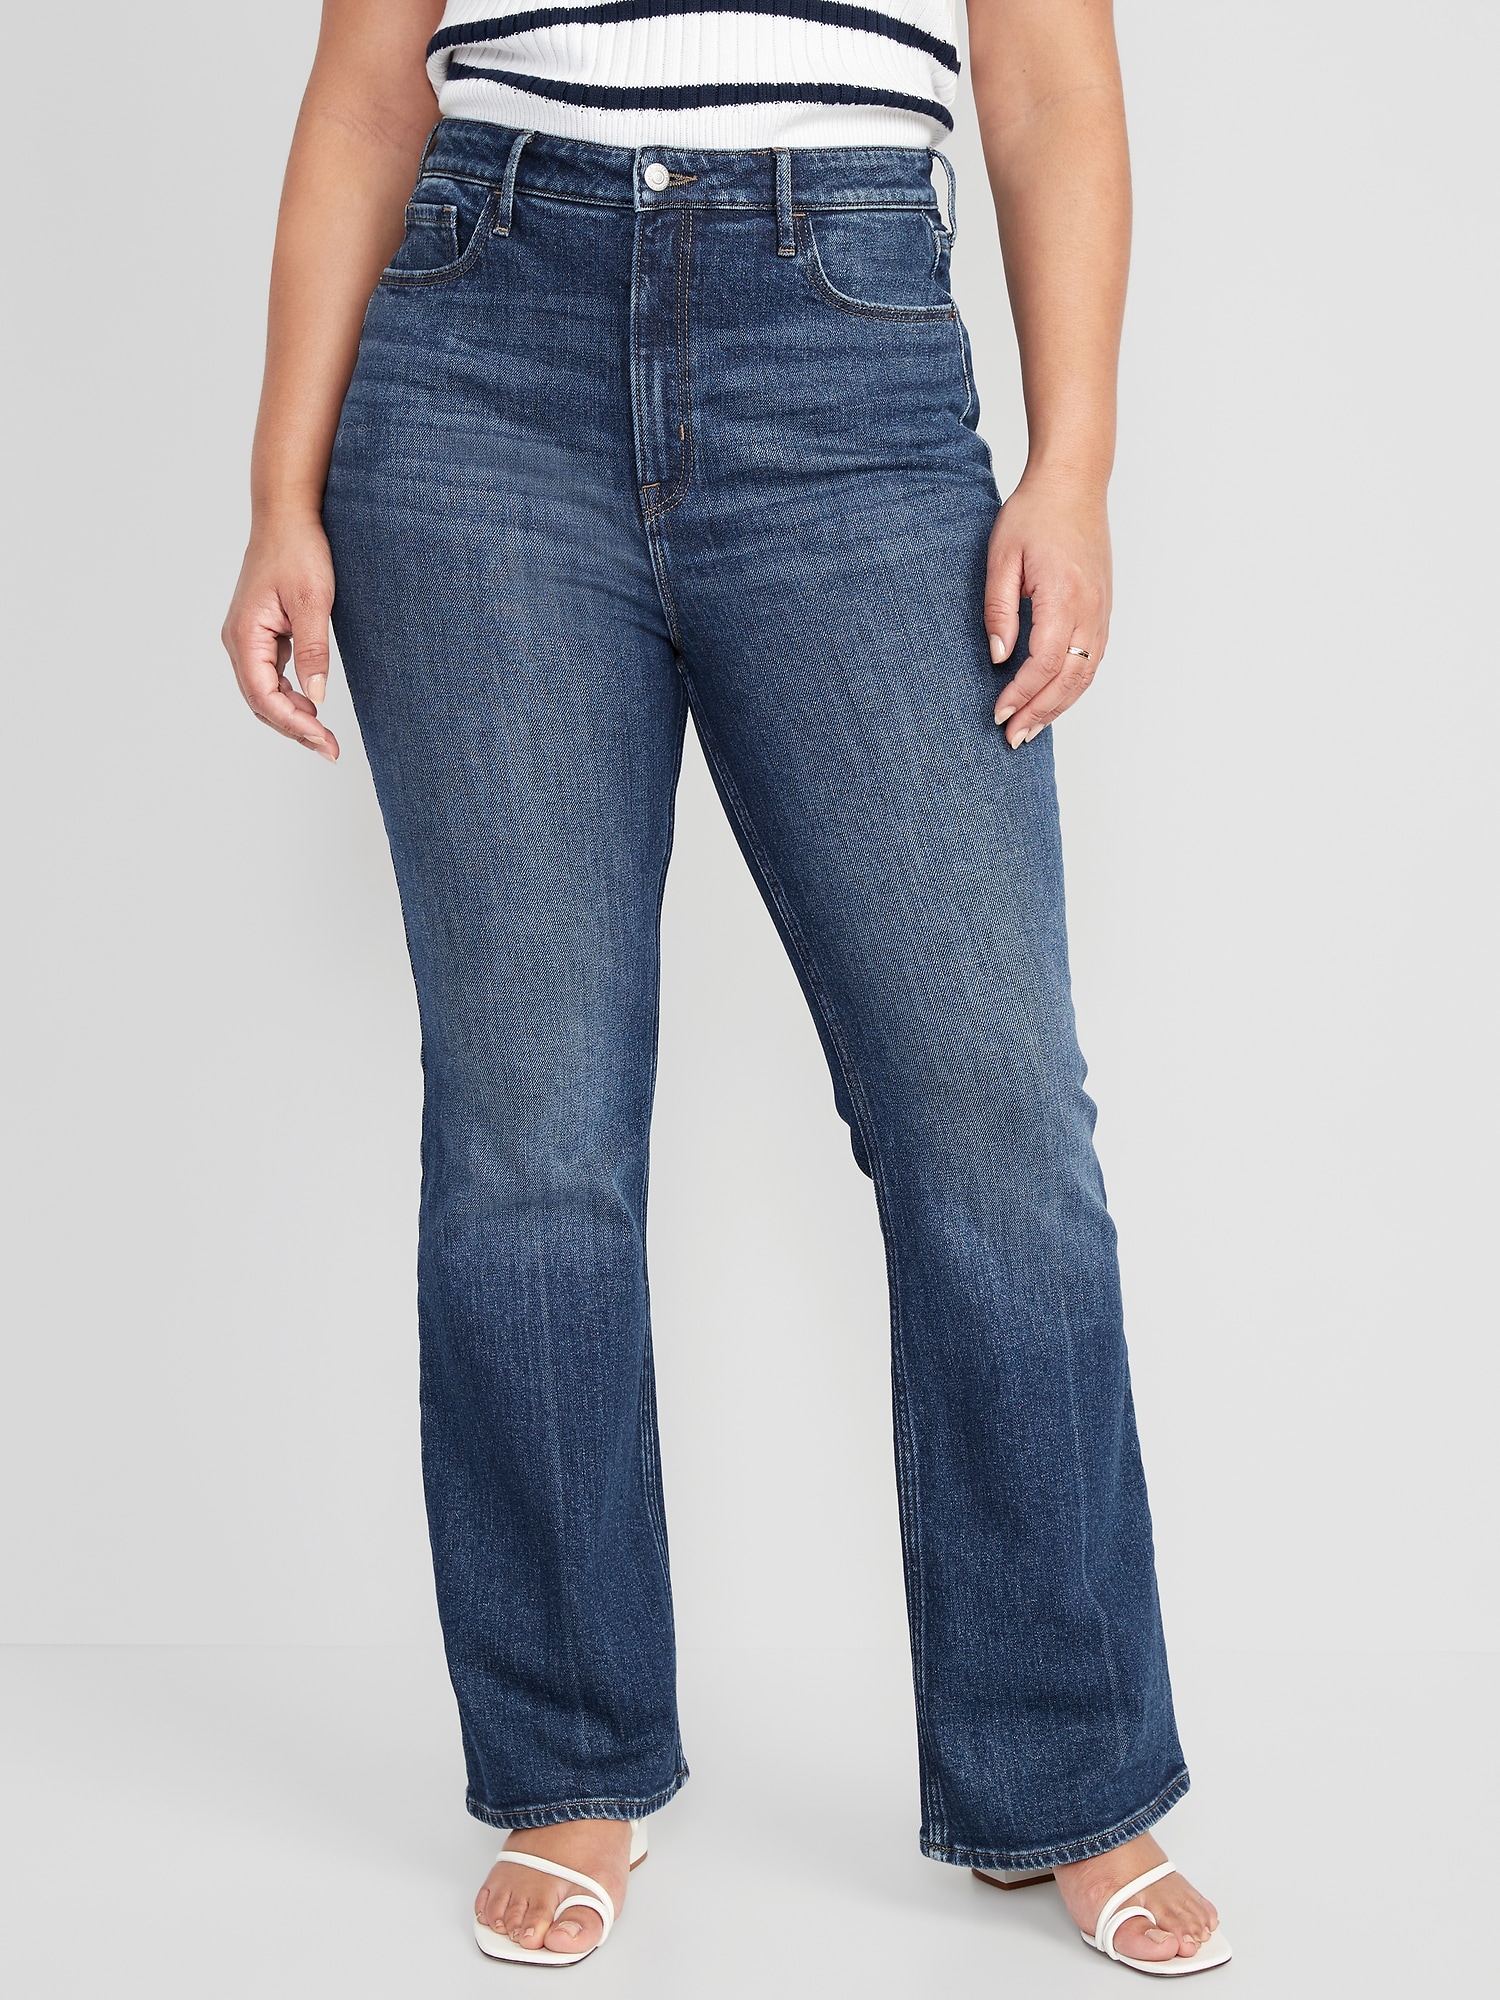 Old Navy Blue Stretch Denim High Rise Flare Jeans 6 - $31 - From